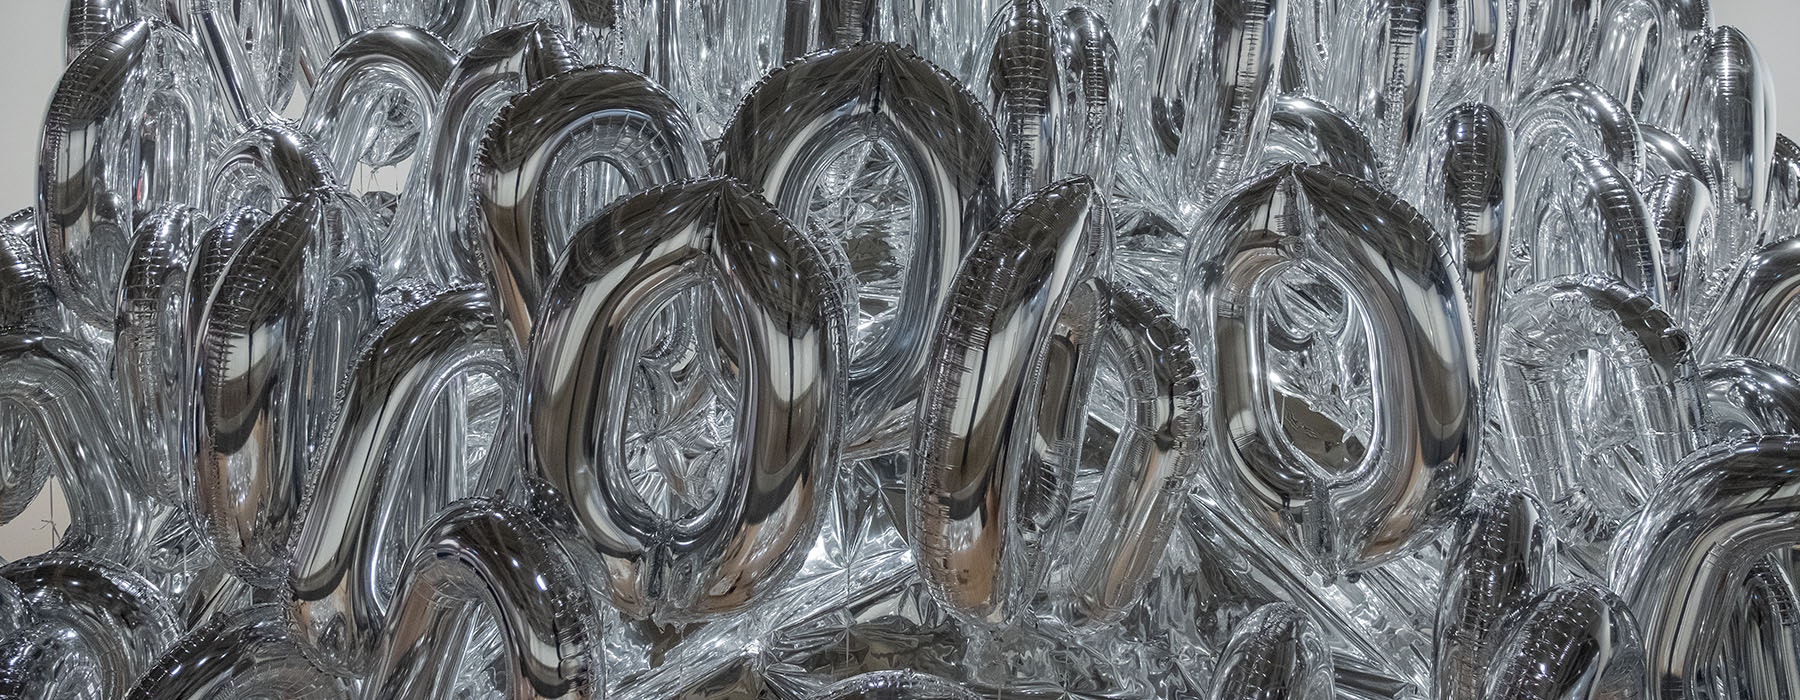 Close-up of Mikala Dwyer’s The silverings, featuring inflated silver balloons shaped like zeroes